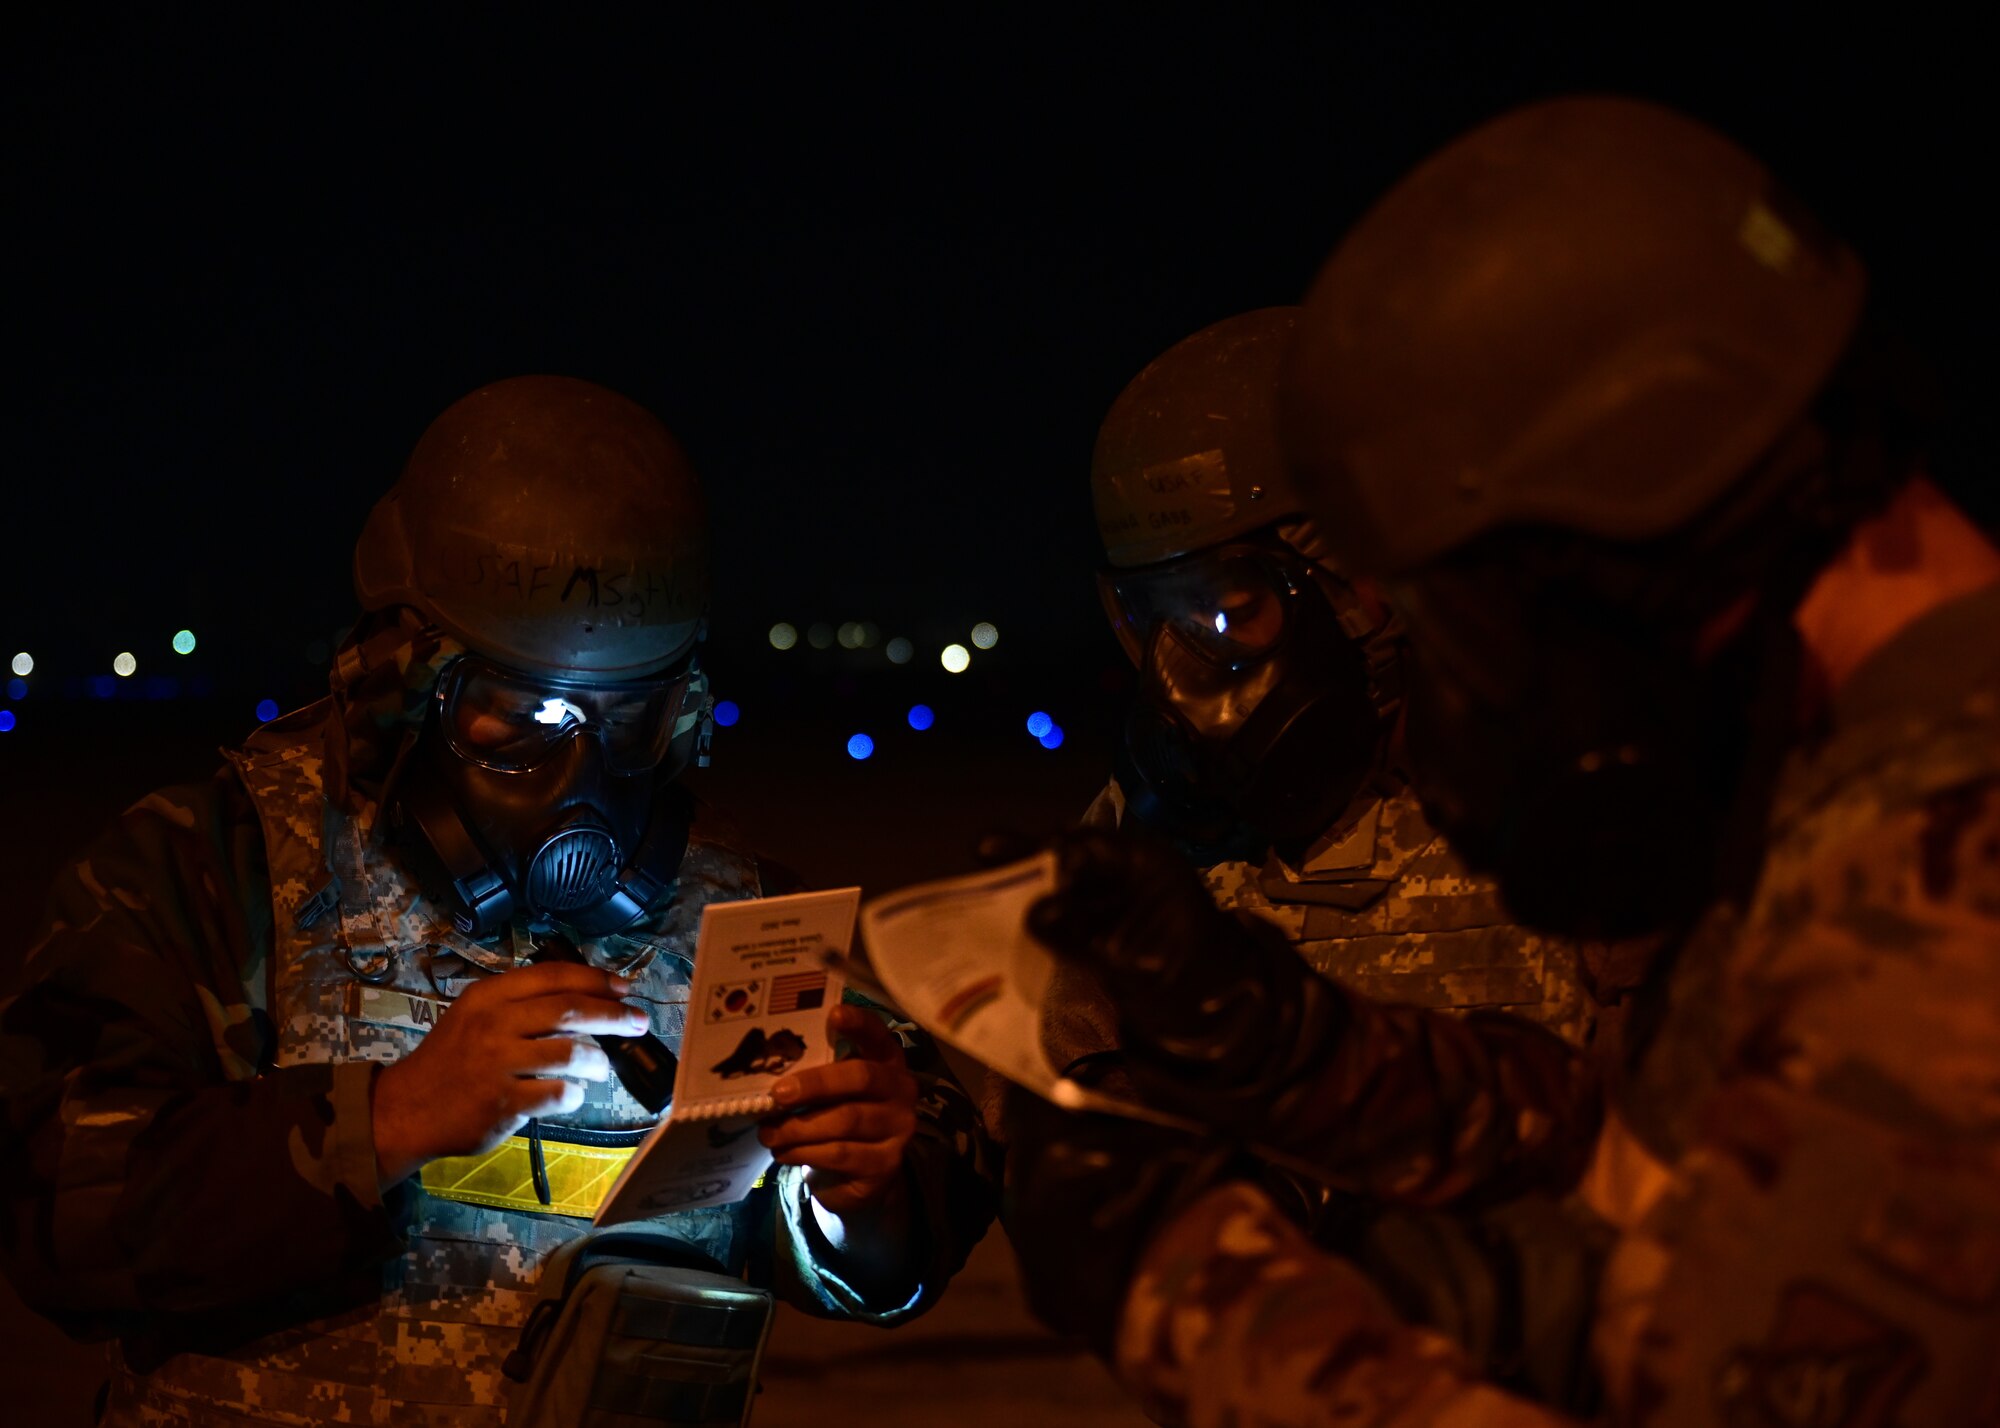 U.S Air Force Master Sgt. David Varady (left), 80th Fighter Generation Squadron (FGS) flightline expediter, Senior Airman Joshua Gabb (center), 80th FGS specialist, and Master Sgt. Robert Pray, 80th FGS crew chief, review their Airman’s Manual quick reference cards during a post-attack reconnaissance sweep training event at Kunsan Air Base, Republic of Korea, Feb. 6, 2023. After donning mission oriented protective posture gear, 80th FGS maintainers swept the flightline in search of simulated chemical contamination or unexploded ordnance to ensure the flightline remains safe to continue operations. (U.S. Air Force photo by Staff Sgt. Isaiah J. Soliz)